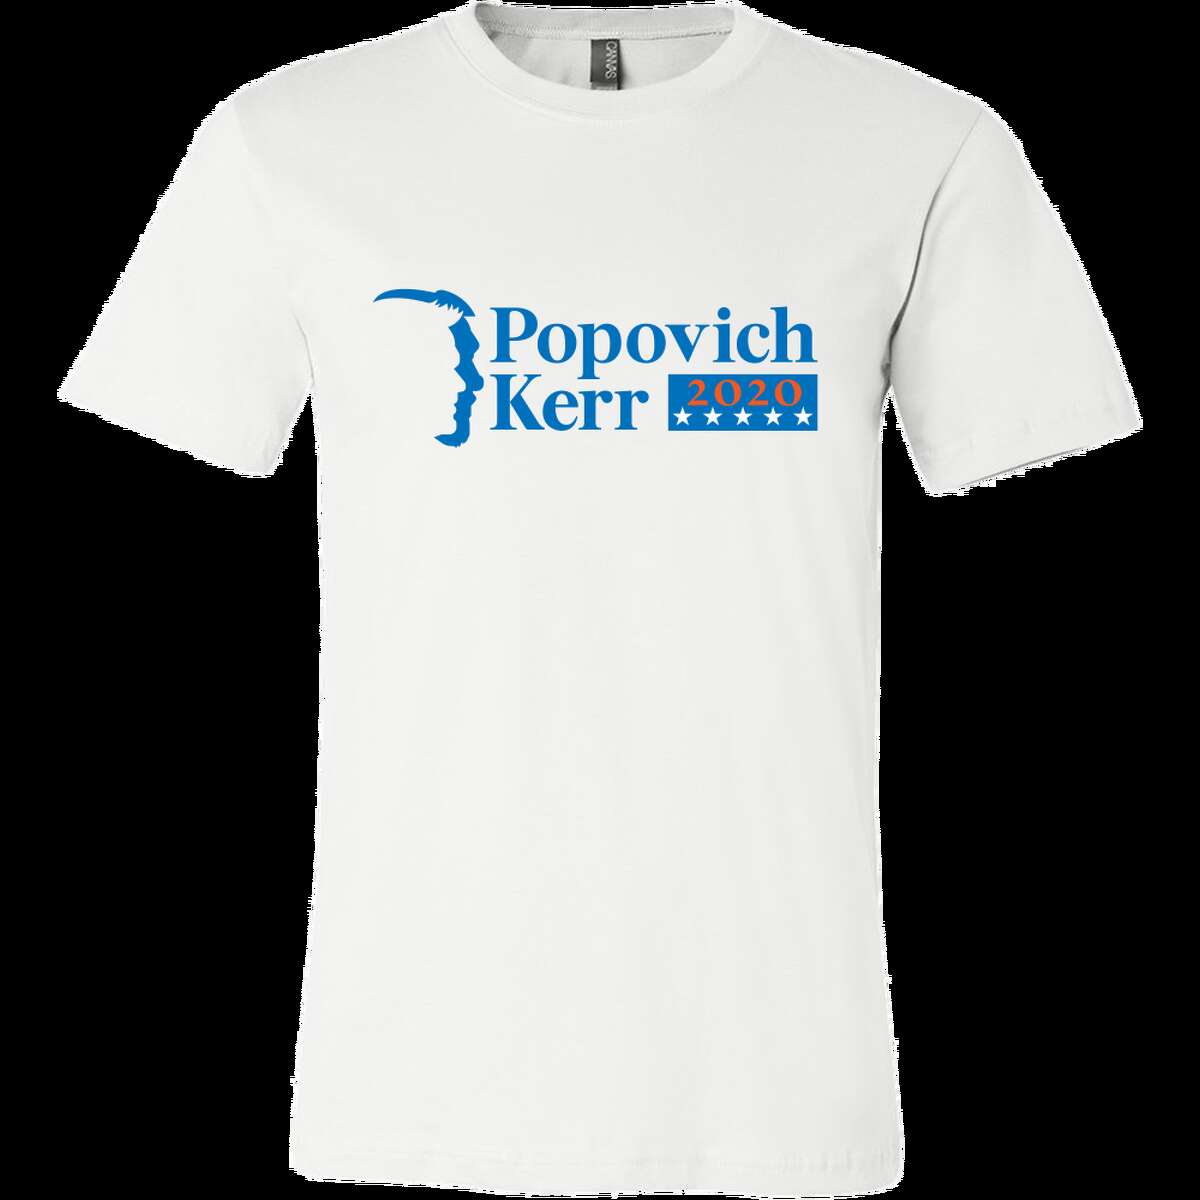 A Popovich-Kerr 2020 shirt, created by NBA fans to support the two coaches.